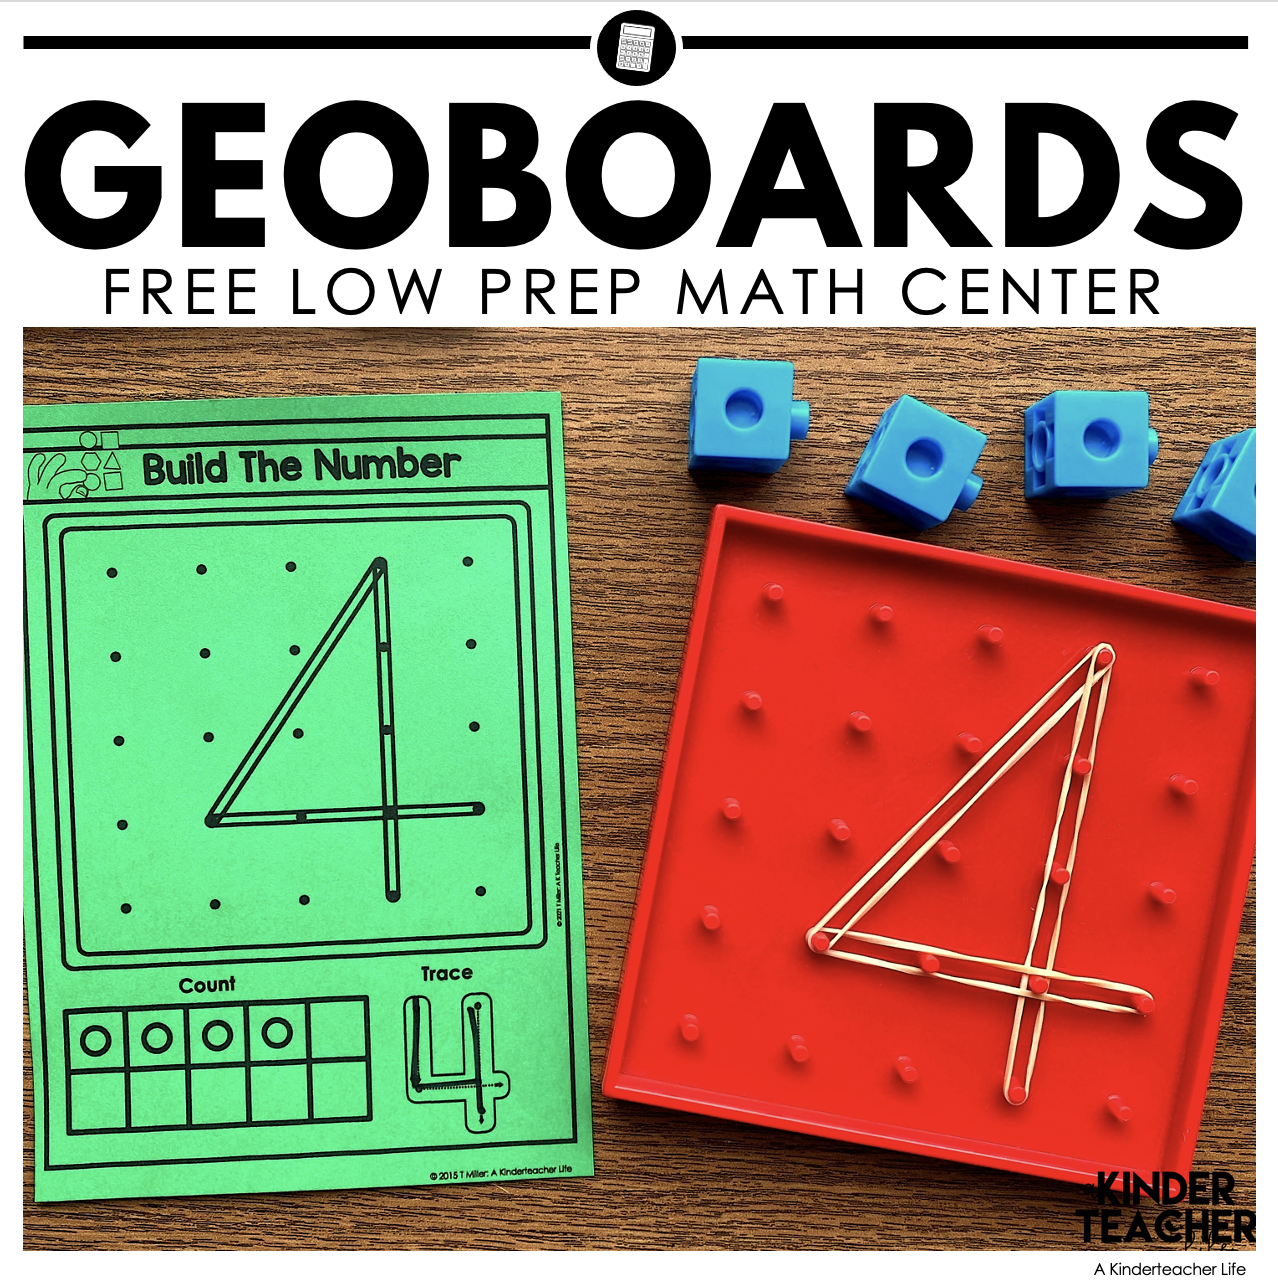 Free Math Center Activity Your Students Will Love!